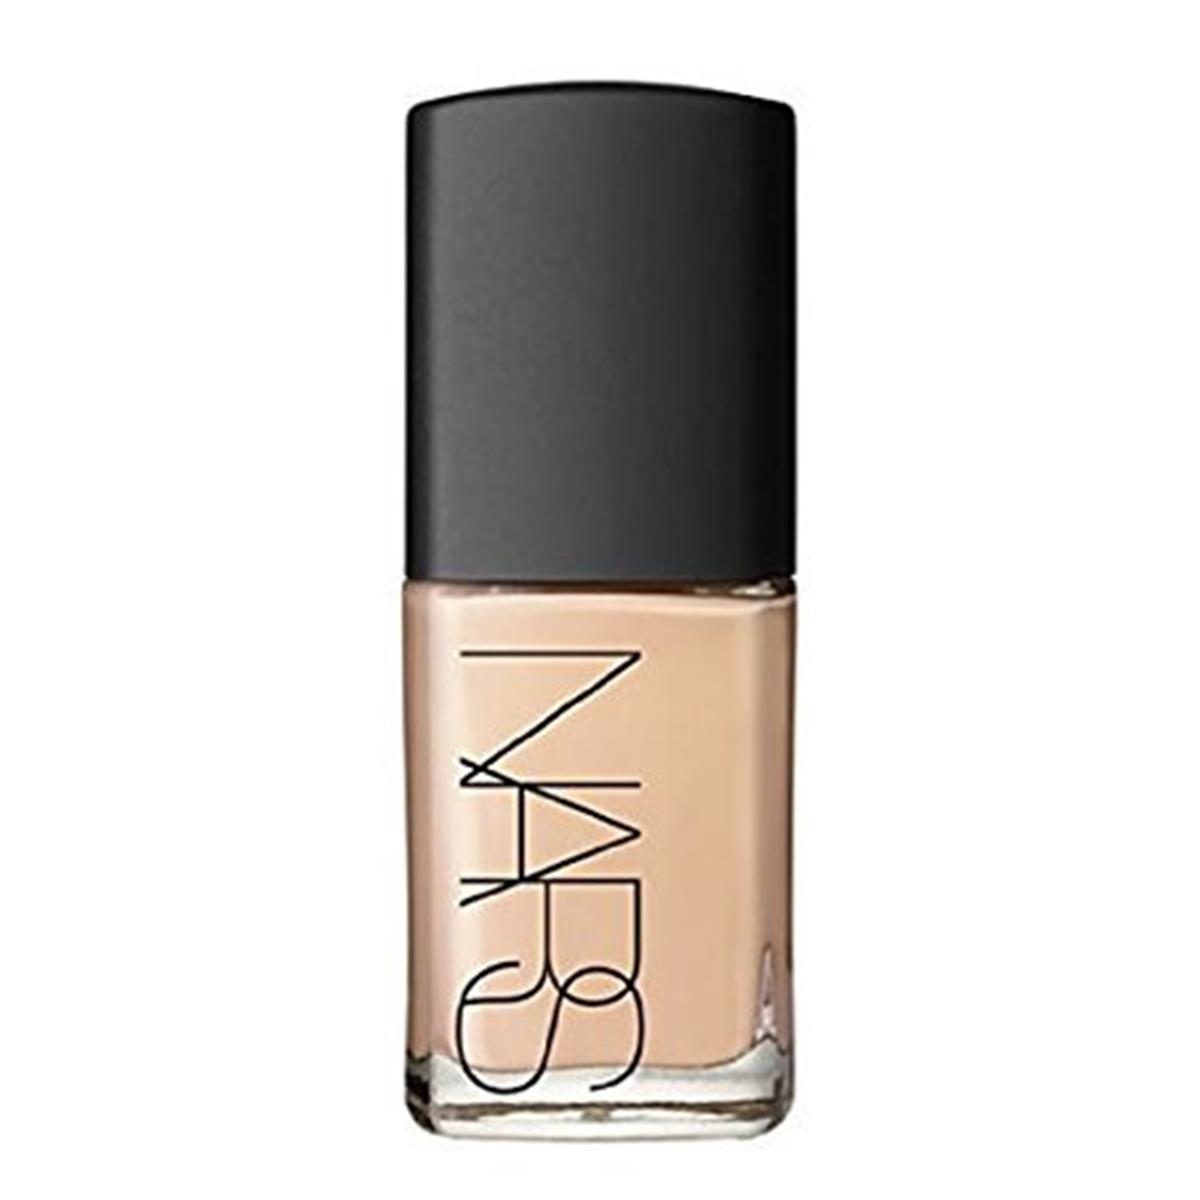 Picture of Nars NARSFO61 Sheer Glow Foundation Deauville - 1.0 oz